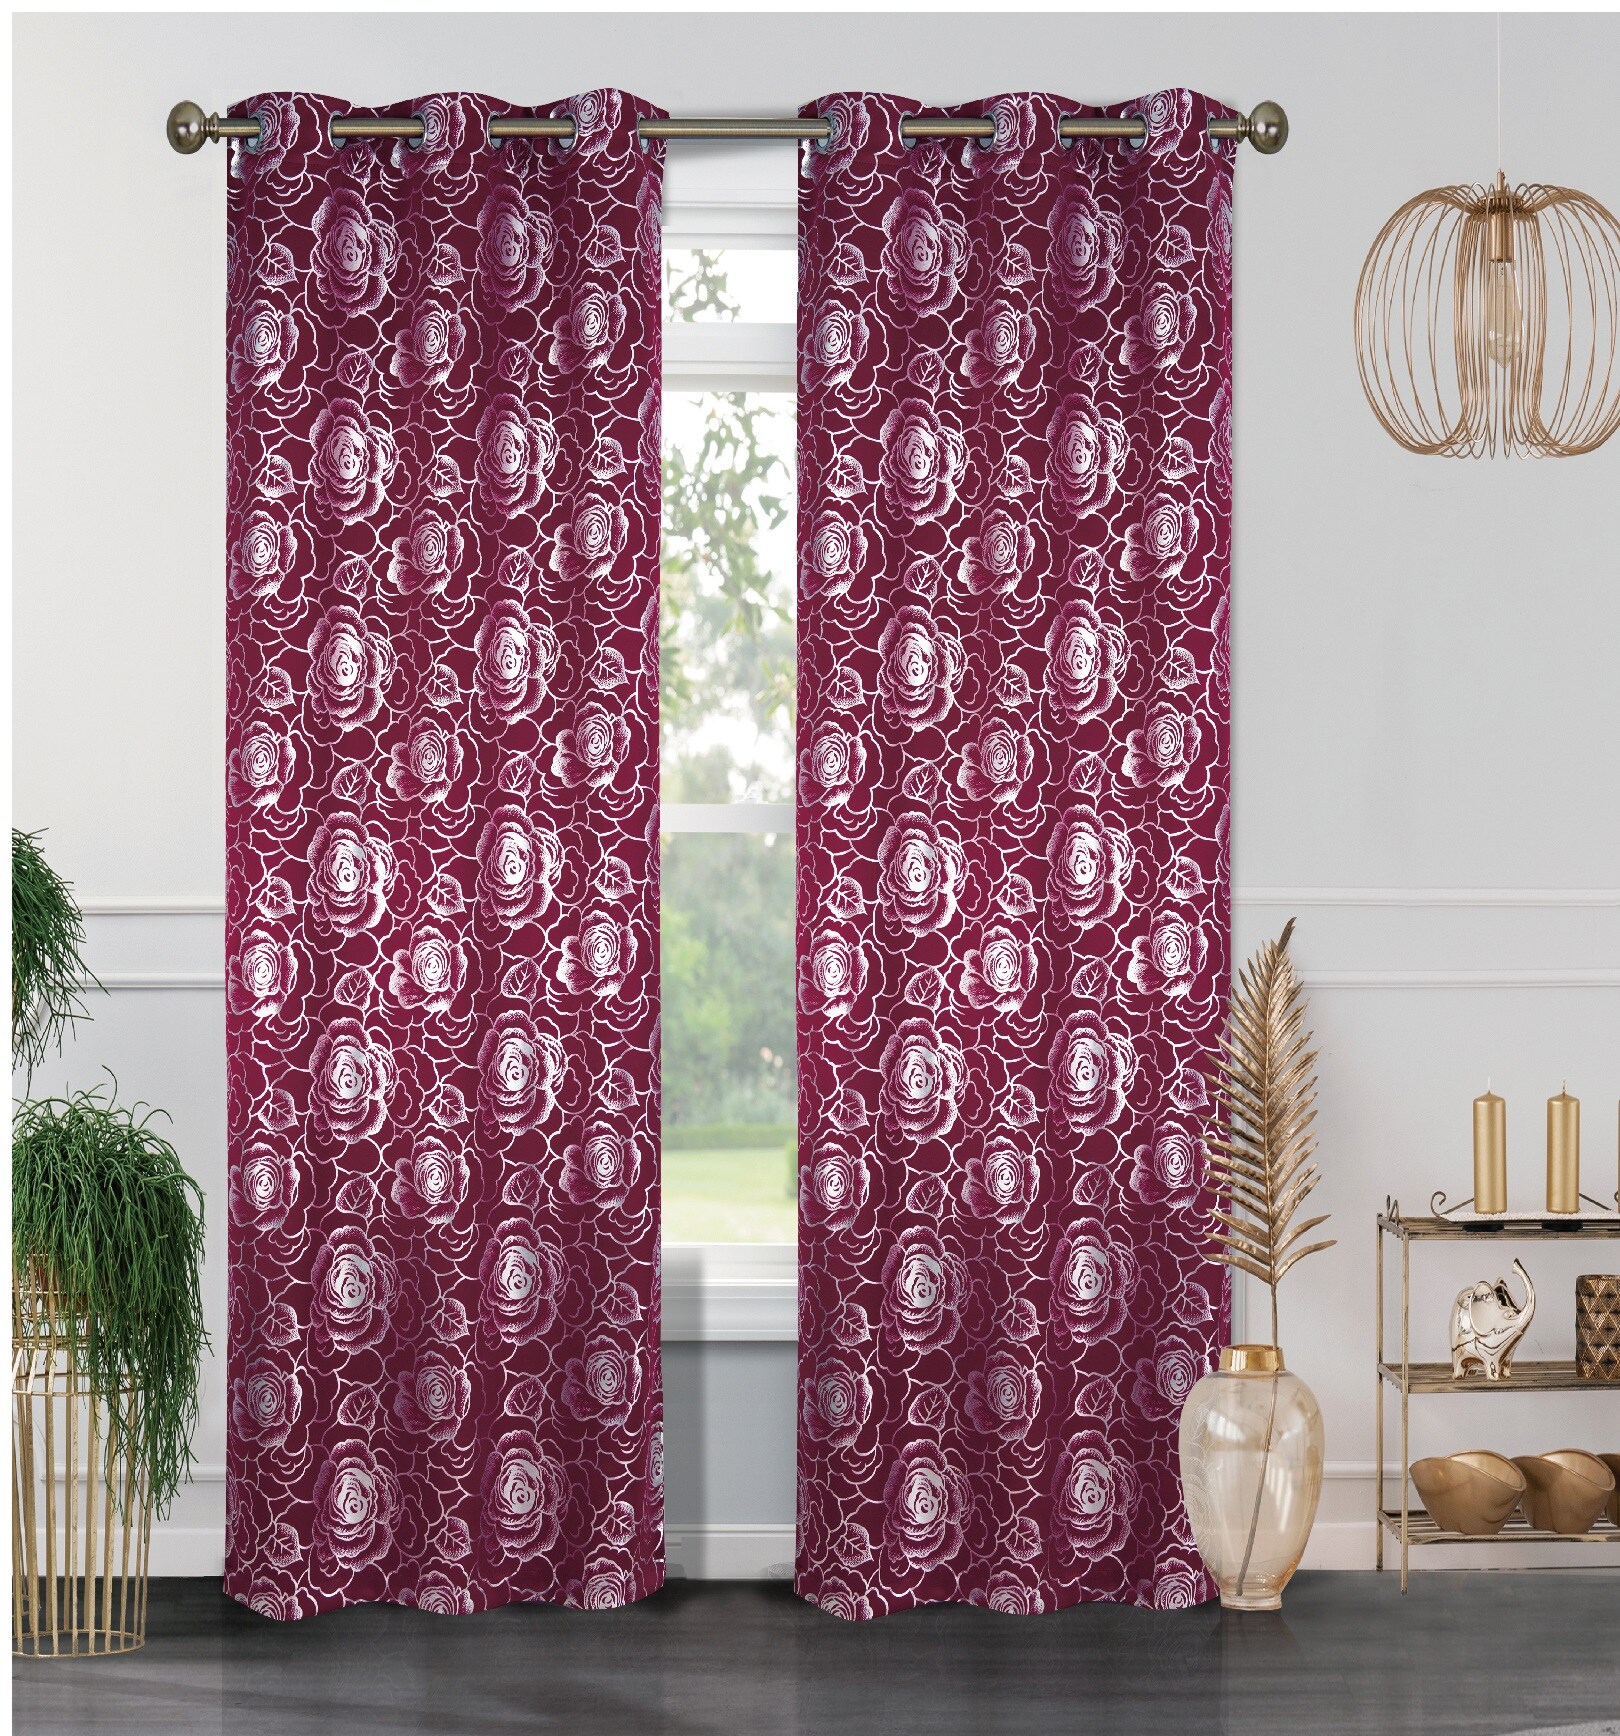 Flowers Designs Insulated Blackout Window Grommets Curtain 1 PAIR 84" FLORA 